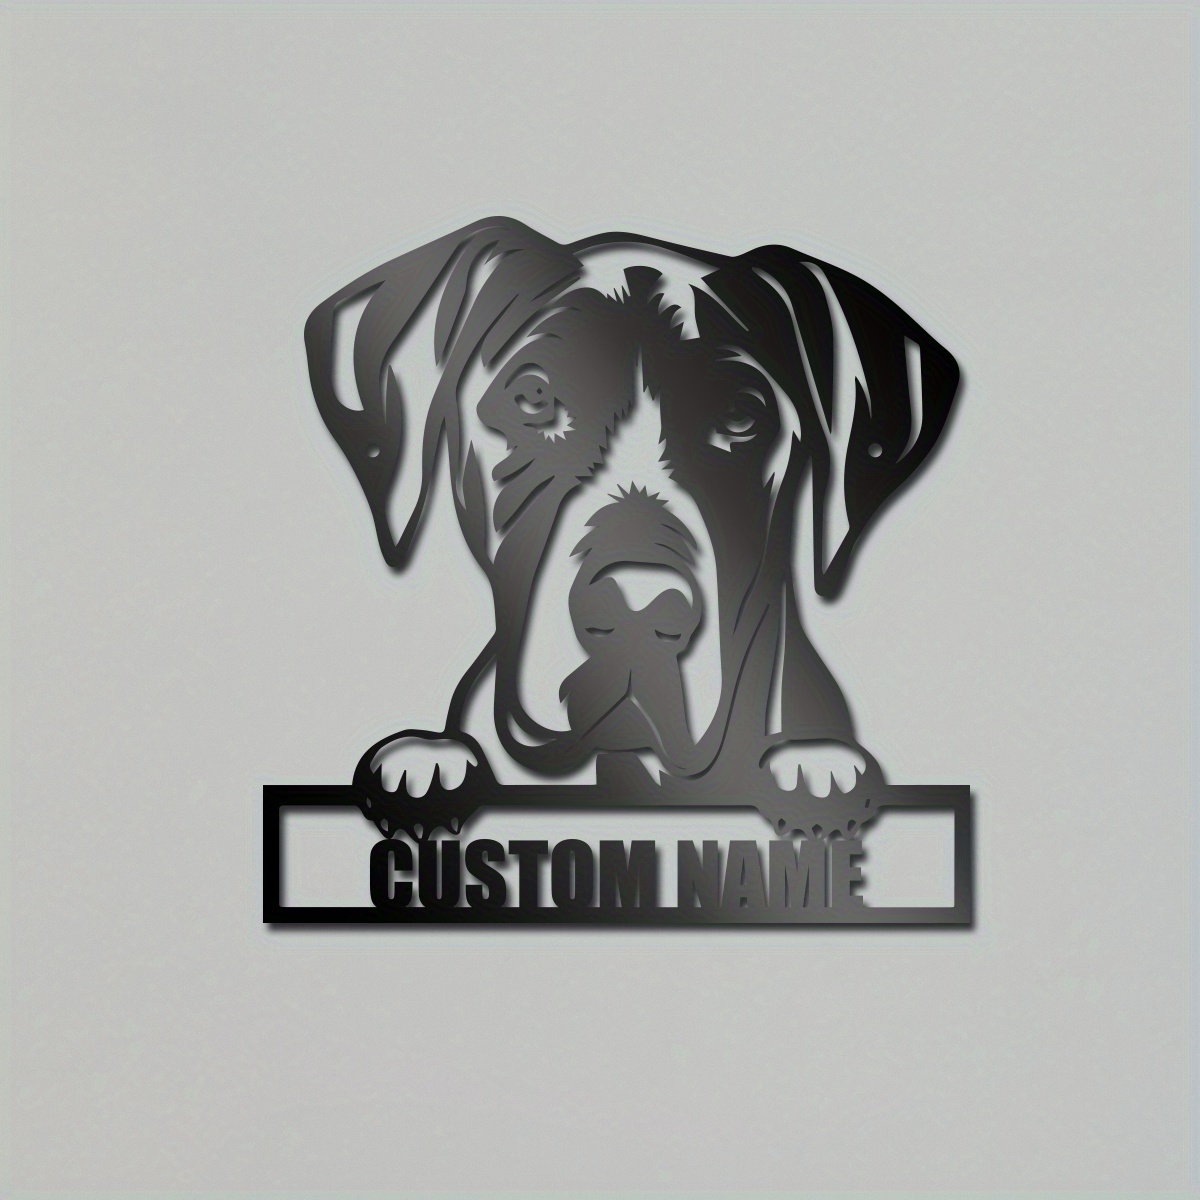 

1pc Personalized Great Dane Metal Sign, Great Dane Metal Wall Art Dog Metal Sign Great Dane Gift Great Dane Lover Gift Great Dane Lover, For Home Room Living Room Office Decor